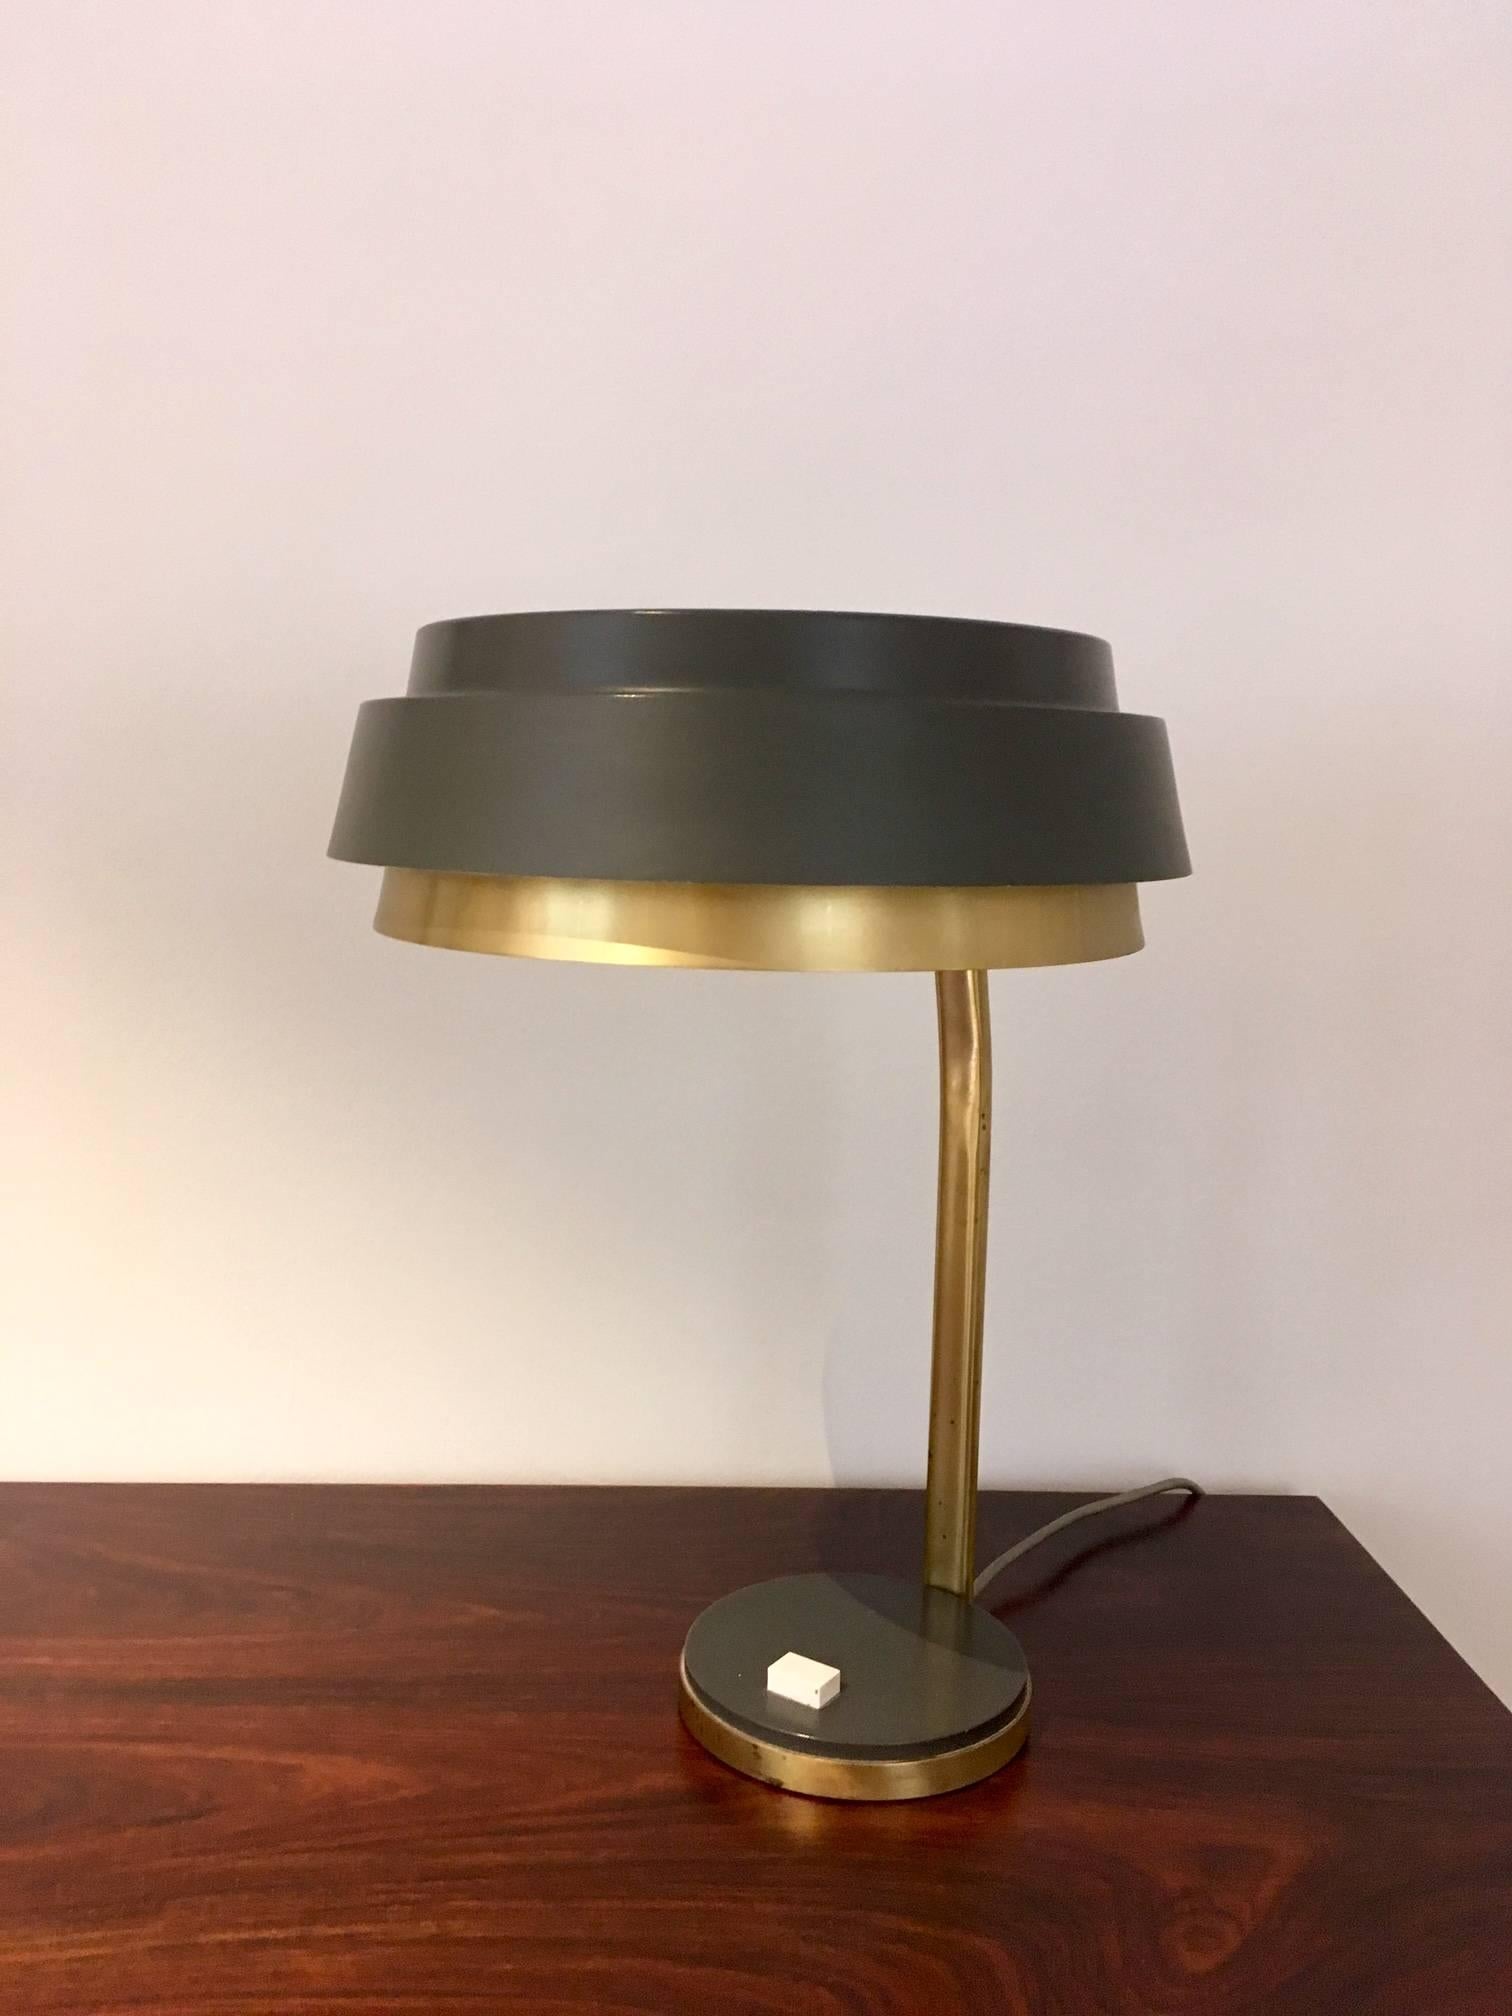 Table lamp from circa 1960s made in Sweden with brass and varnished metal. Minor age-related scratches and stains on brass.